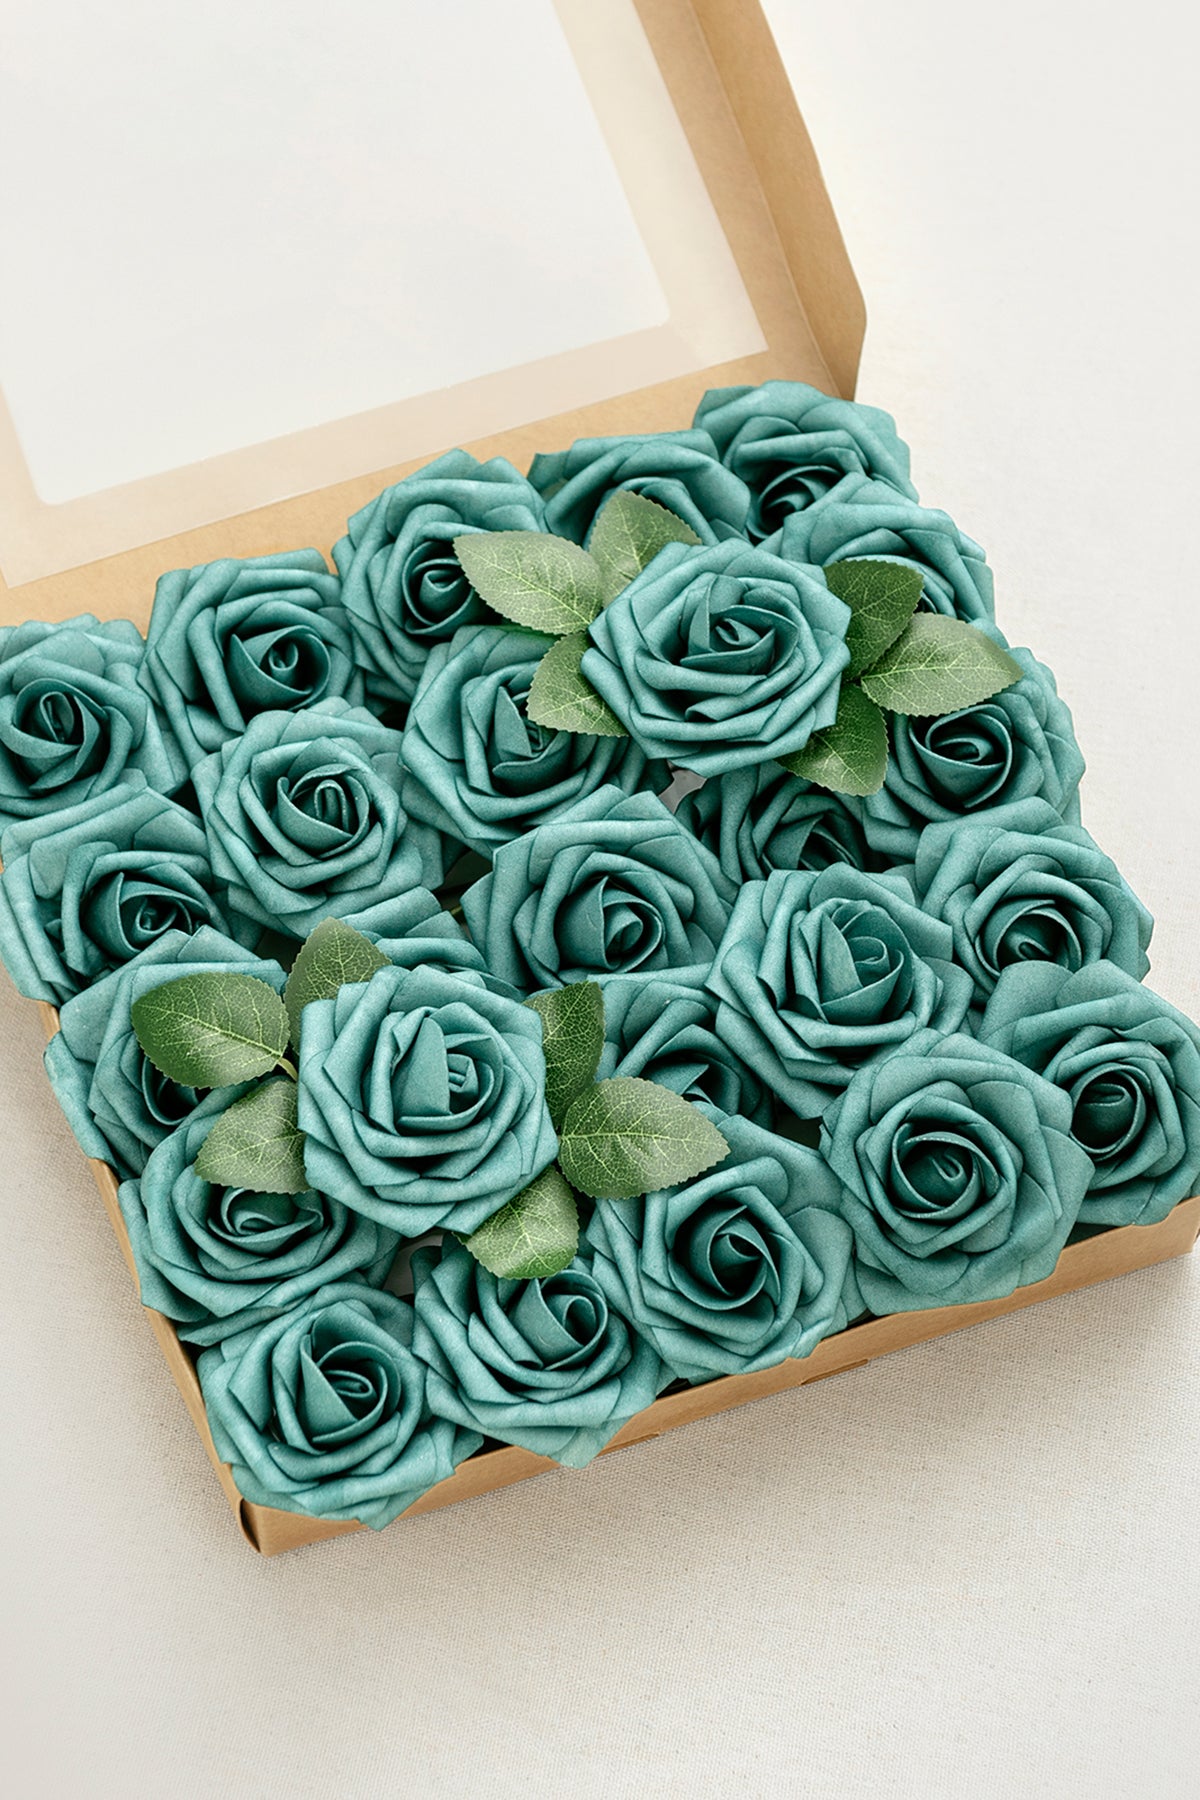 DIY Supporting Flower Boxes in Dark Teal & Marsala